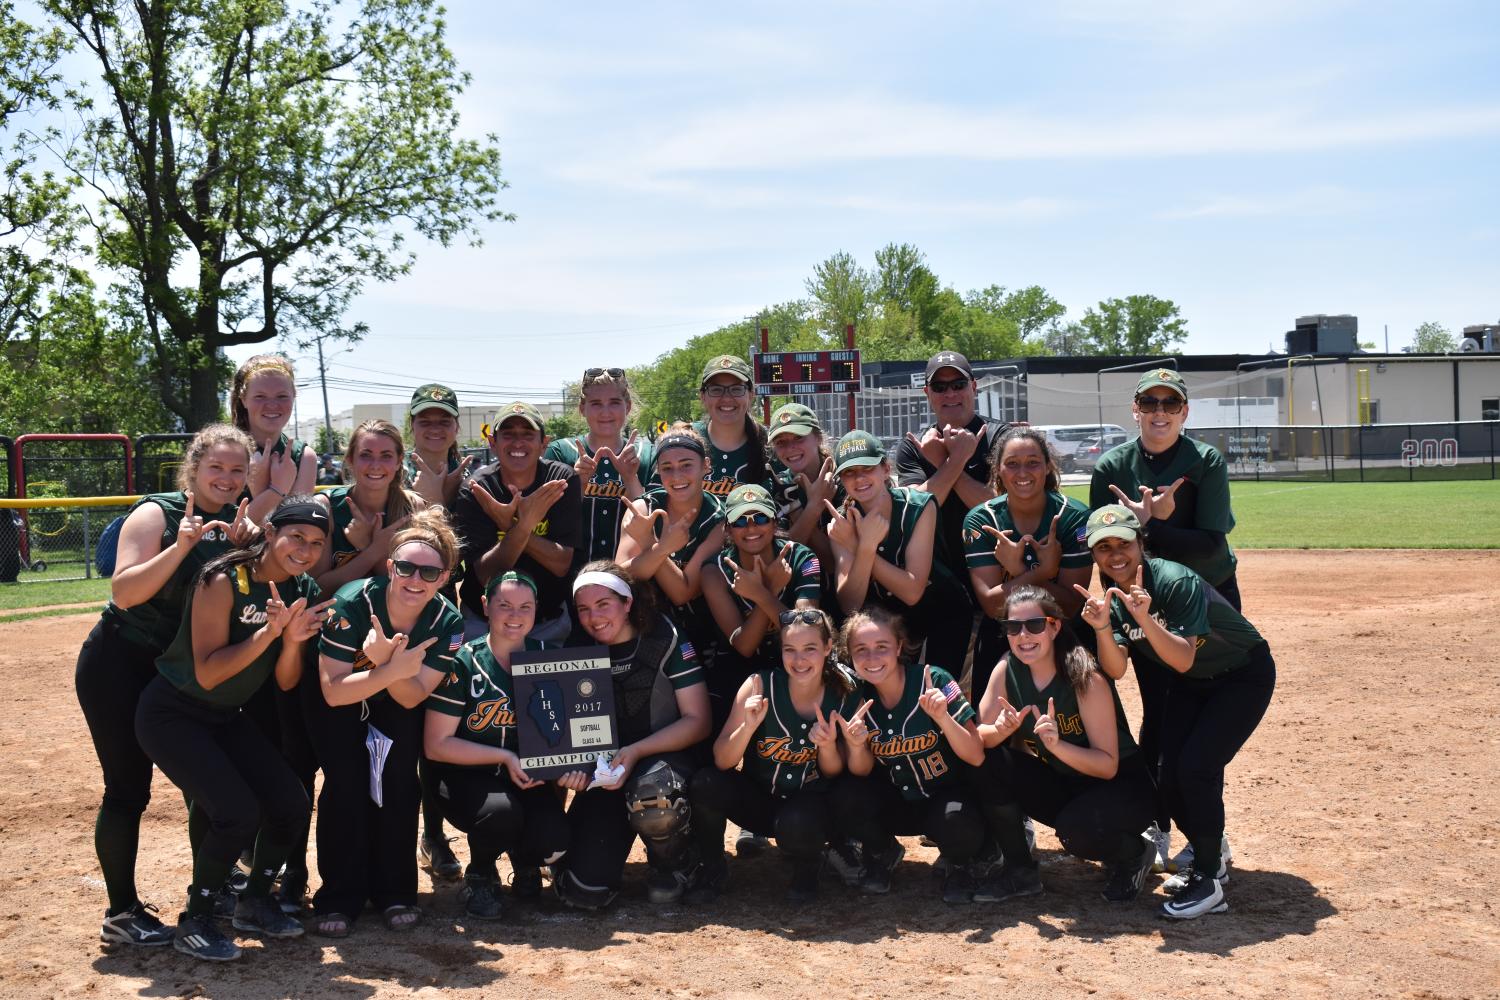 Girls+Varsity+Softball+after+defeating+York+7-2+to+take+home+the+regional+title.+They+followed+the+victory+with+a%0A%0Anarrow+8-7+loss+to+Whitney+Young+but+still+advanced+to+sectionals+for+the+first+time+in+recent+team+history.+%28Greif+Family%29